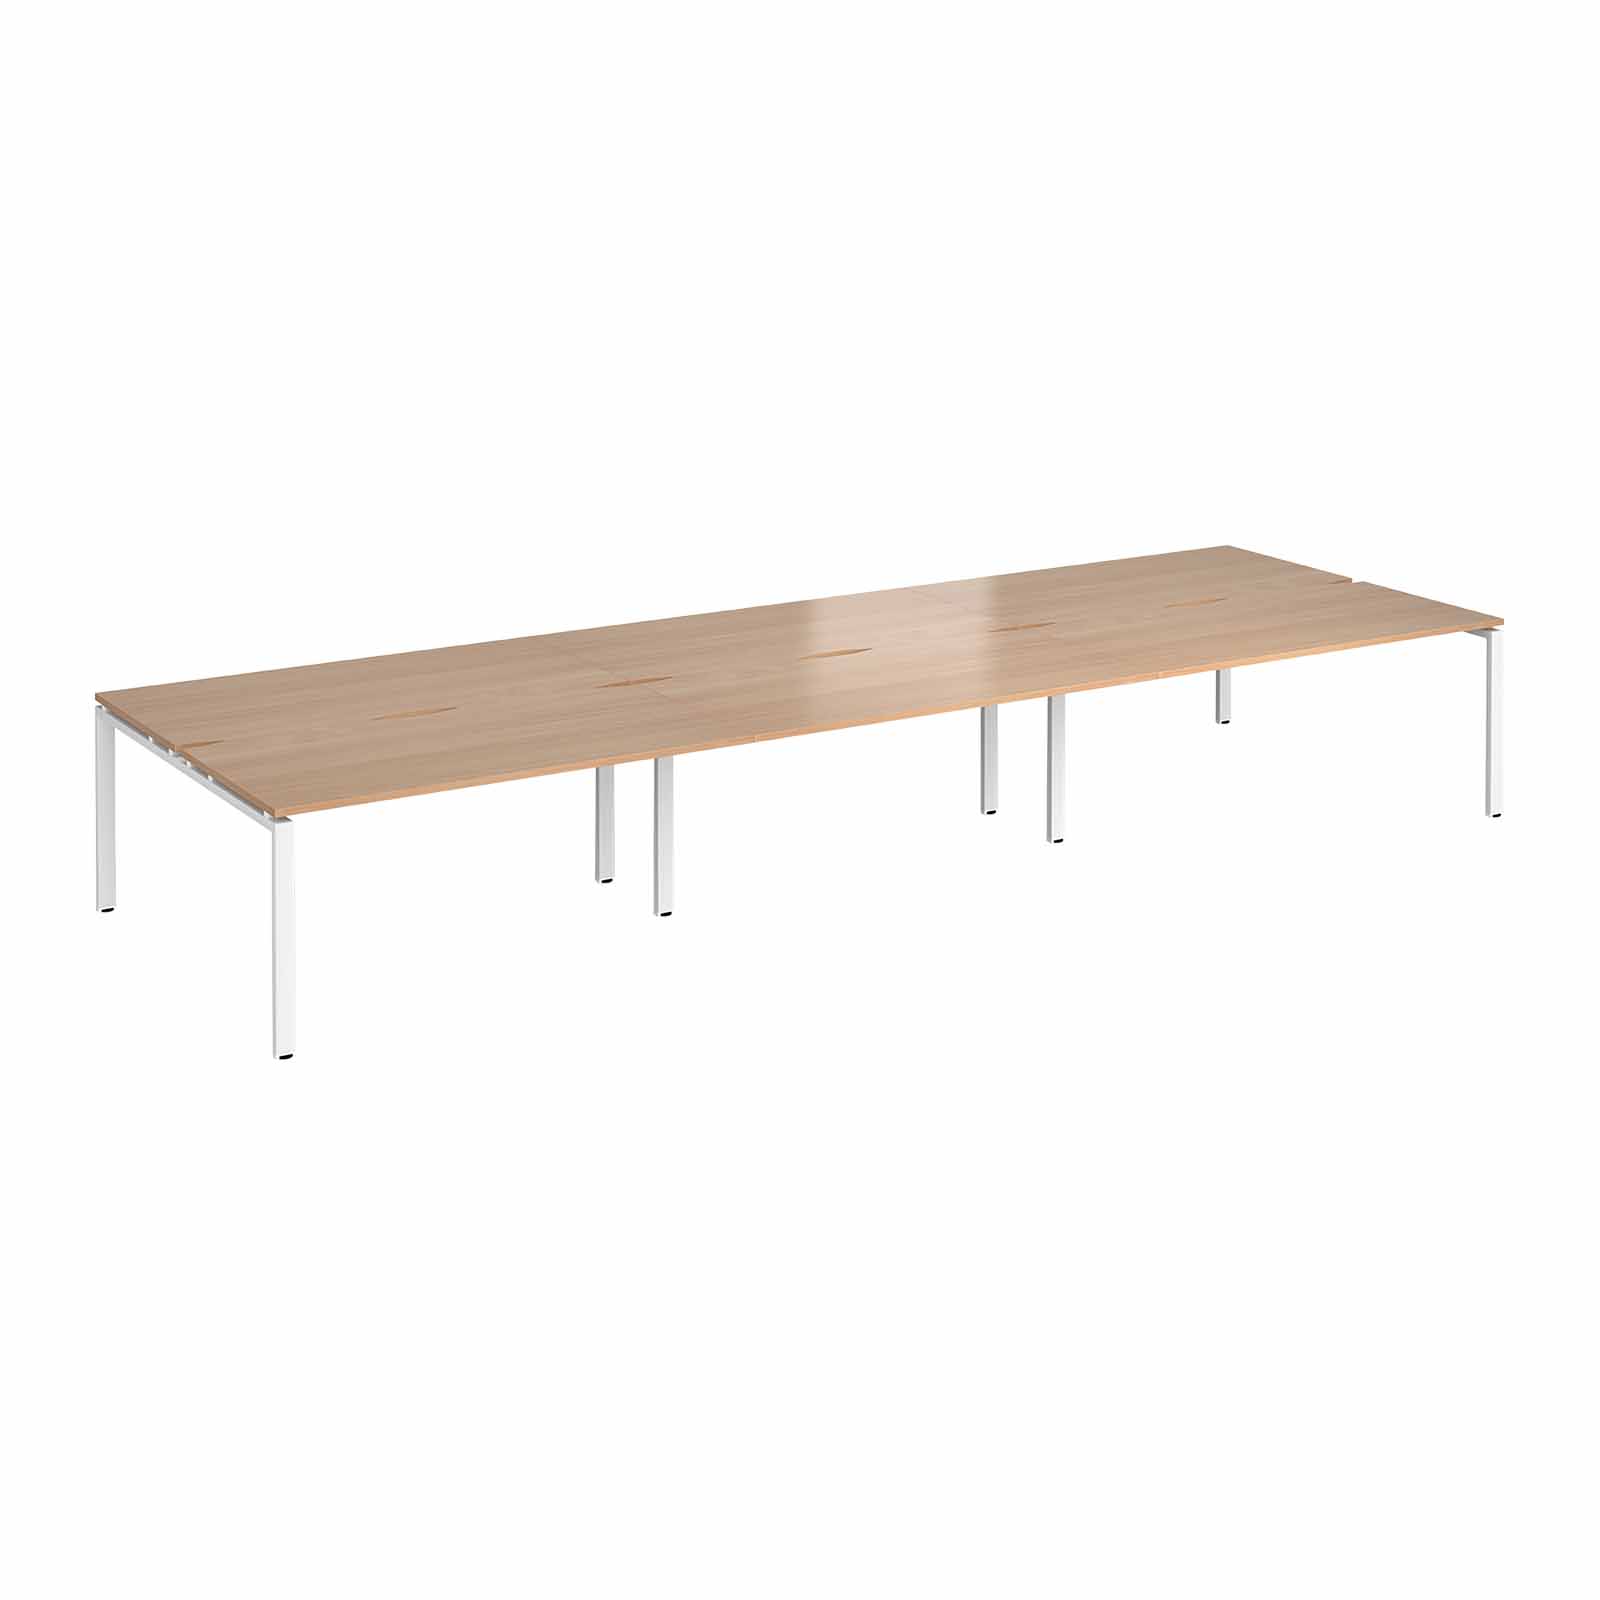 MADE TO ORDER 6 Person - B2B Bench Desk W1000mm x D600mm x H740mm